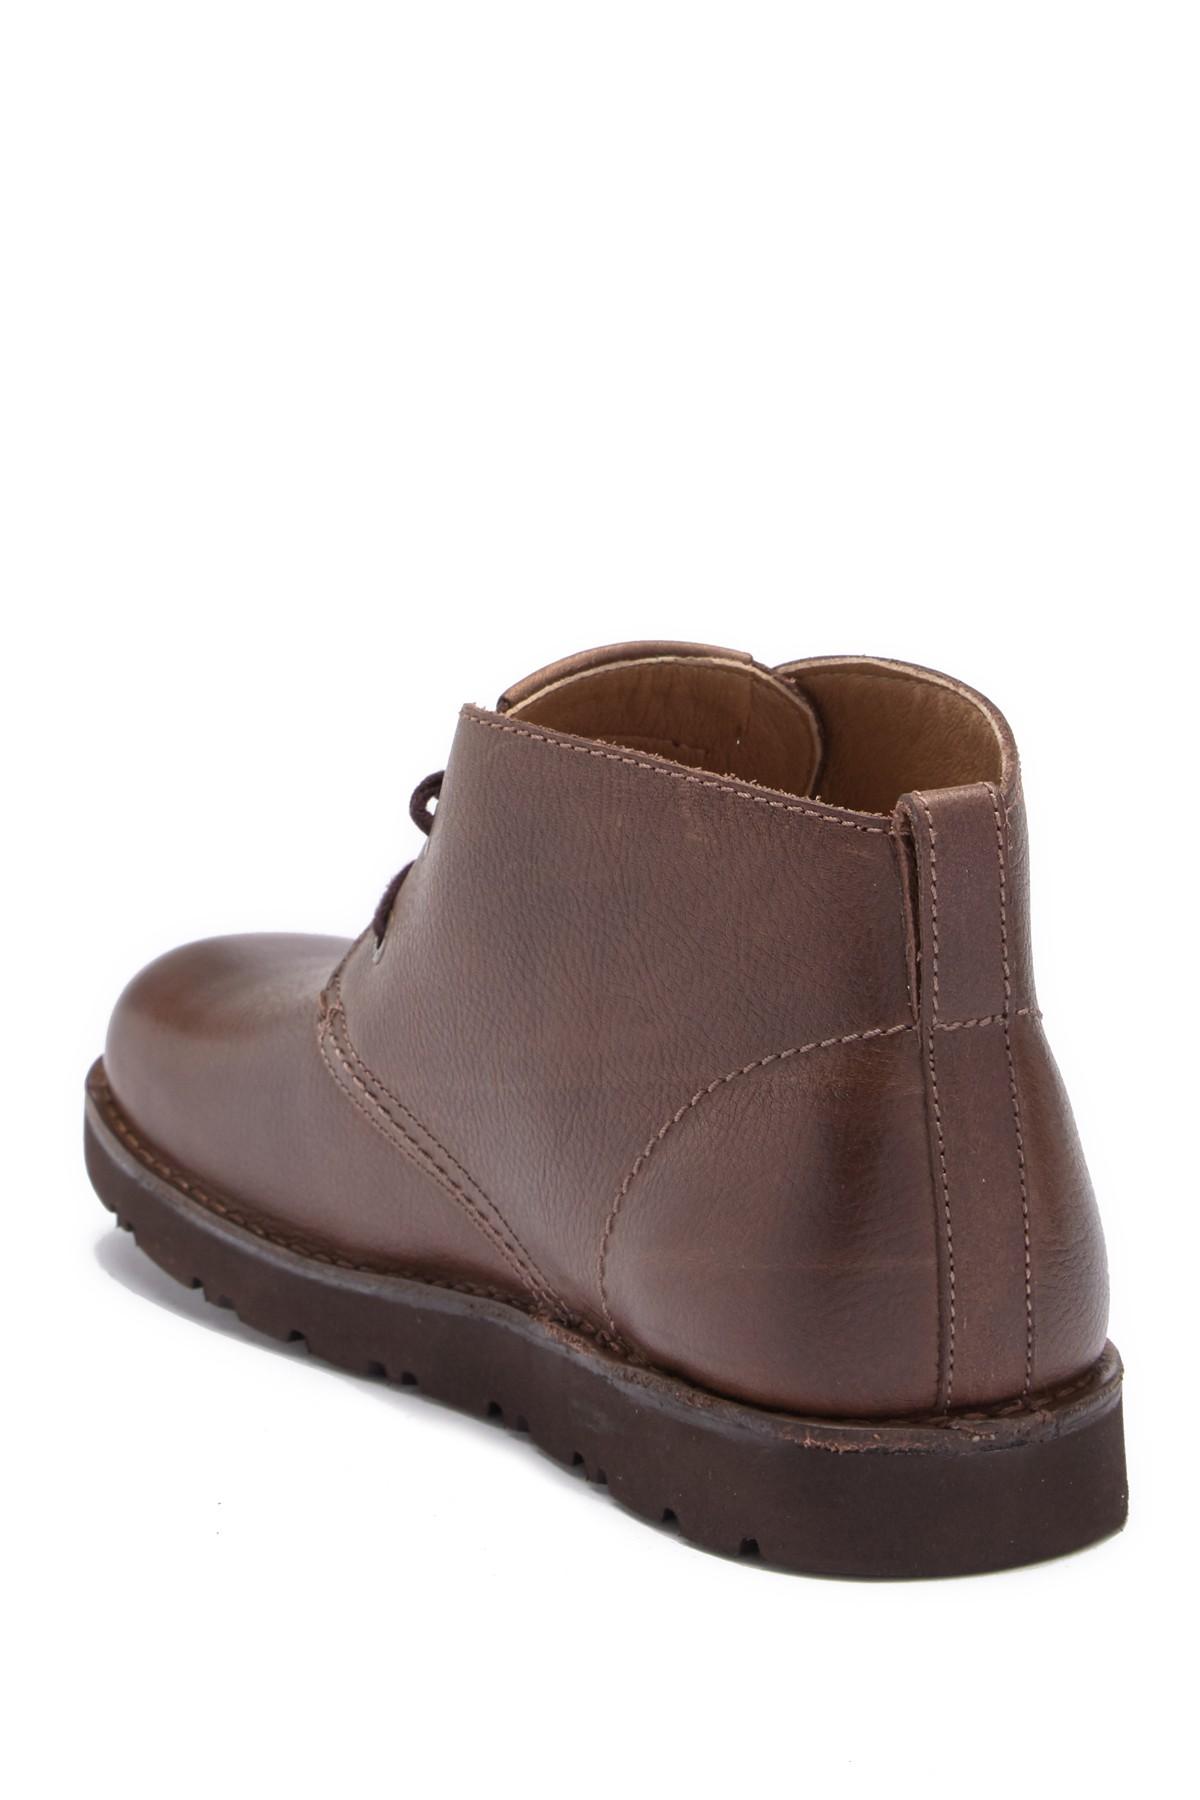 Birkenstock Harris Low Leather Boot - Discontinued in Brown for Men - Lyst